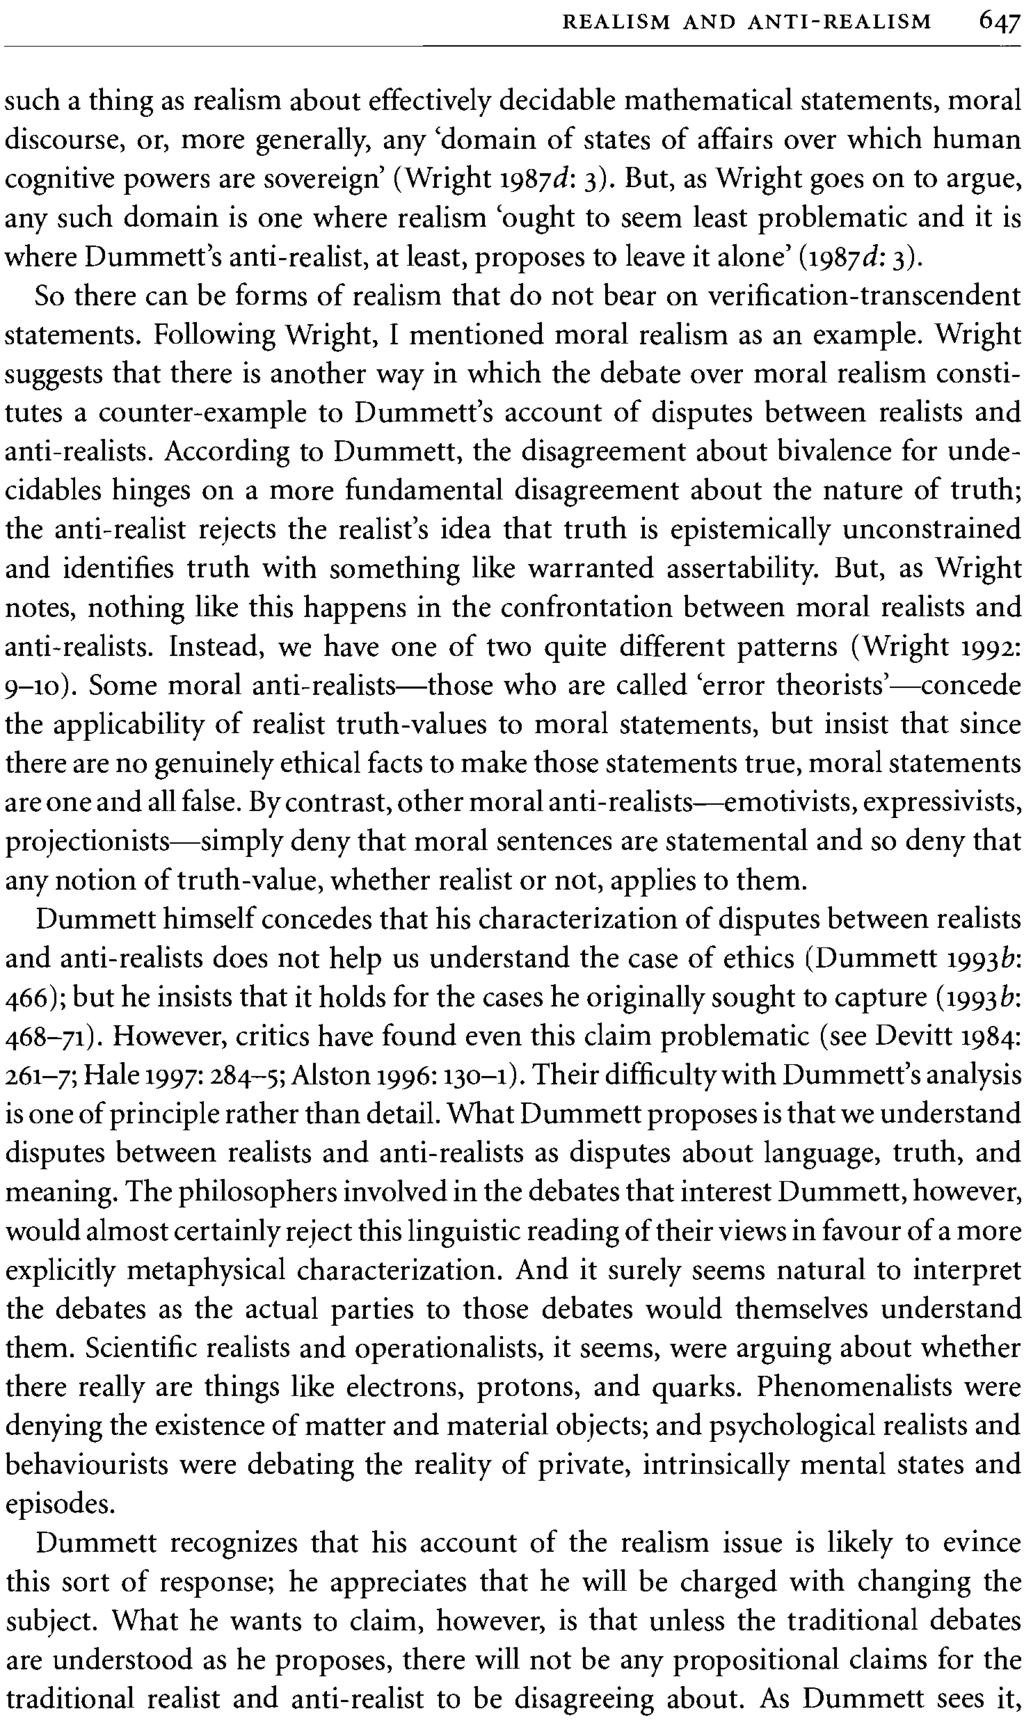 REALISM AND ANTI-REALISM 647 such a thing as realism about effectively decidable mathematical statements, moral discourse, or, more generally, any 'domain of states of affairs over which human